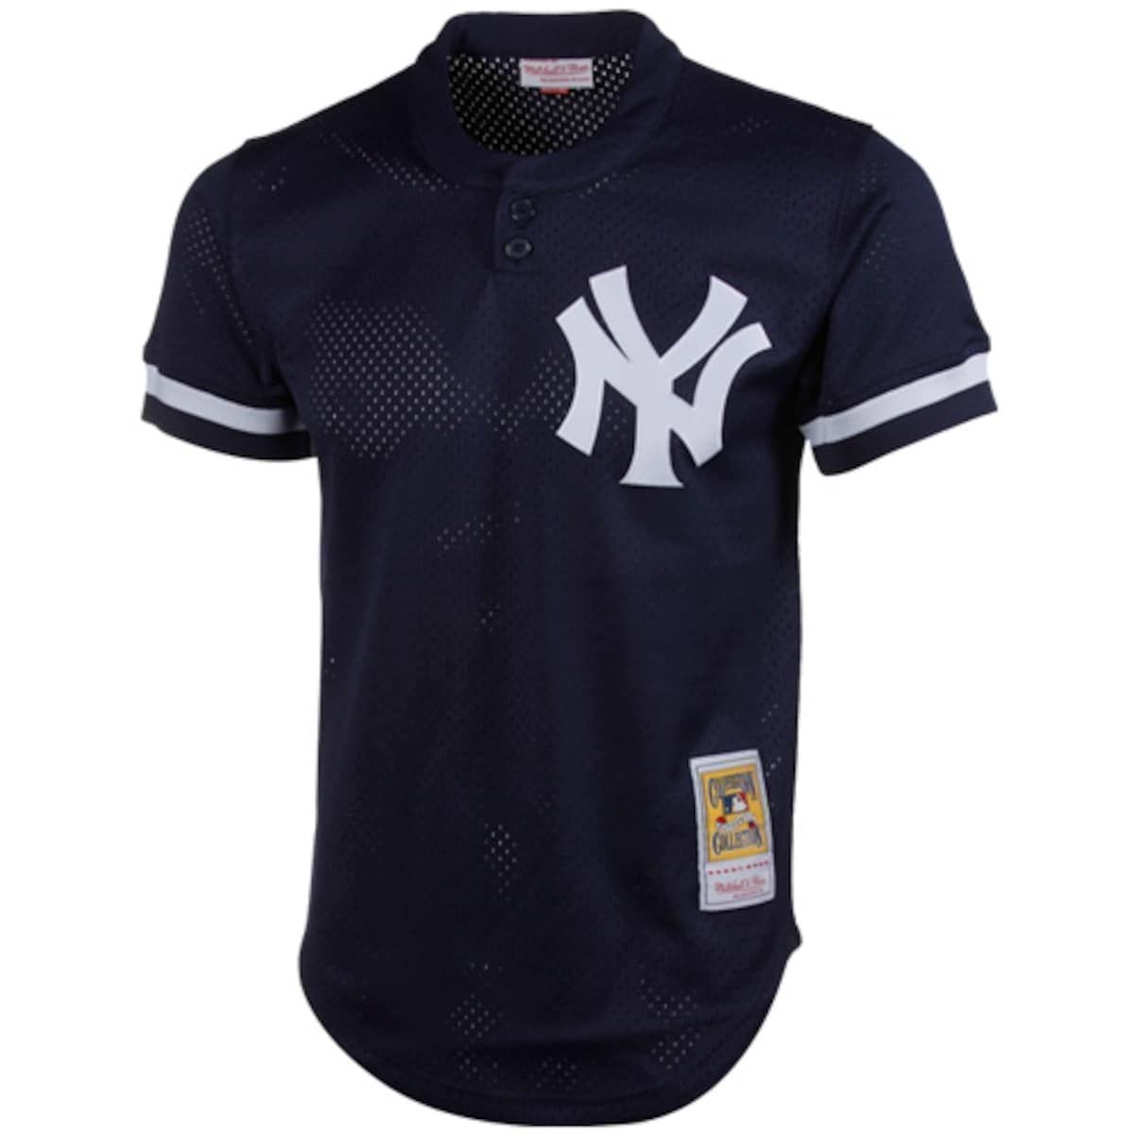 Mitchell & Ness Men's Don Mattingly Navy New York Yankees 1995 Authentic Cooperstown Collection Mesh Batting Practice Jersey - Image 3 of 4